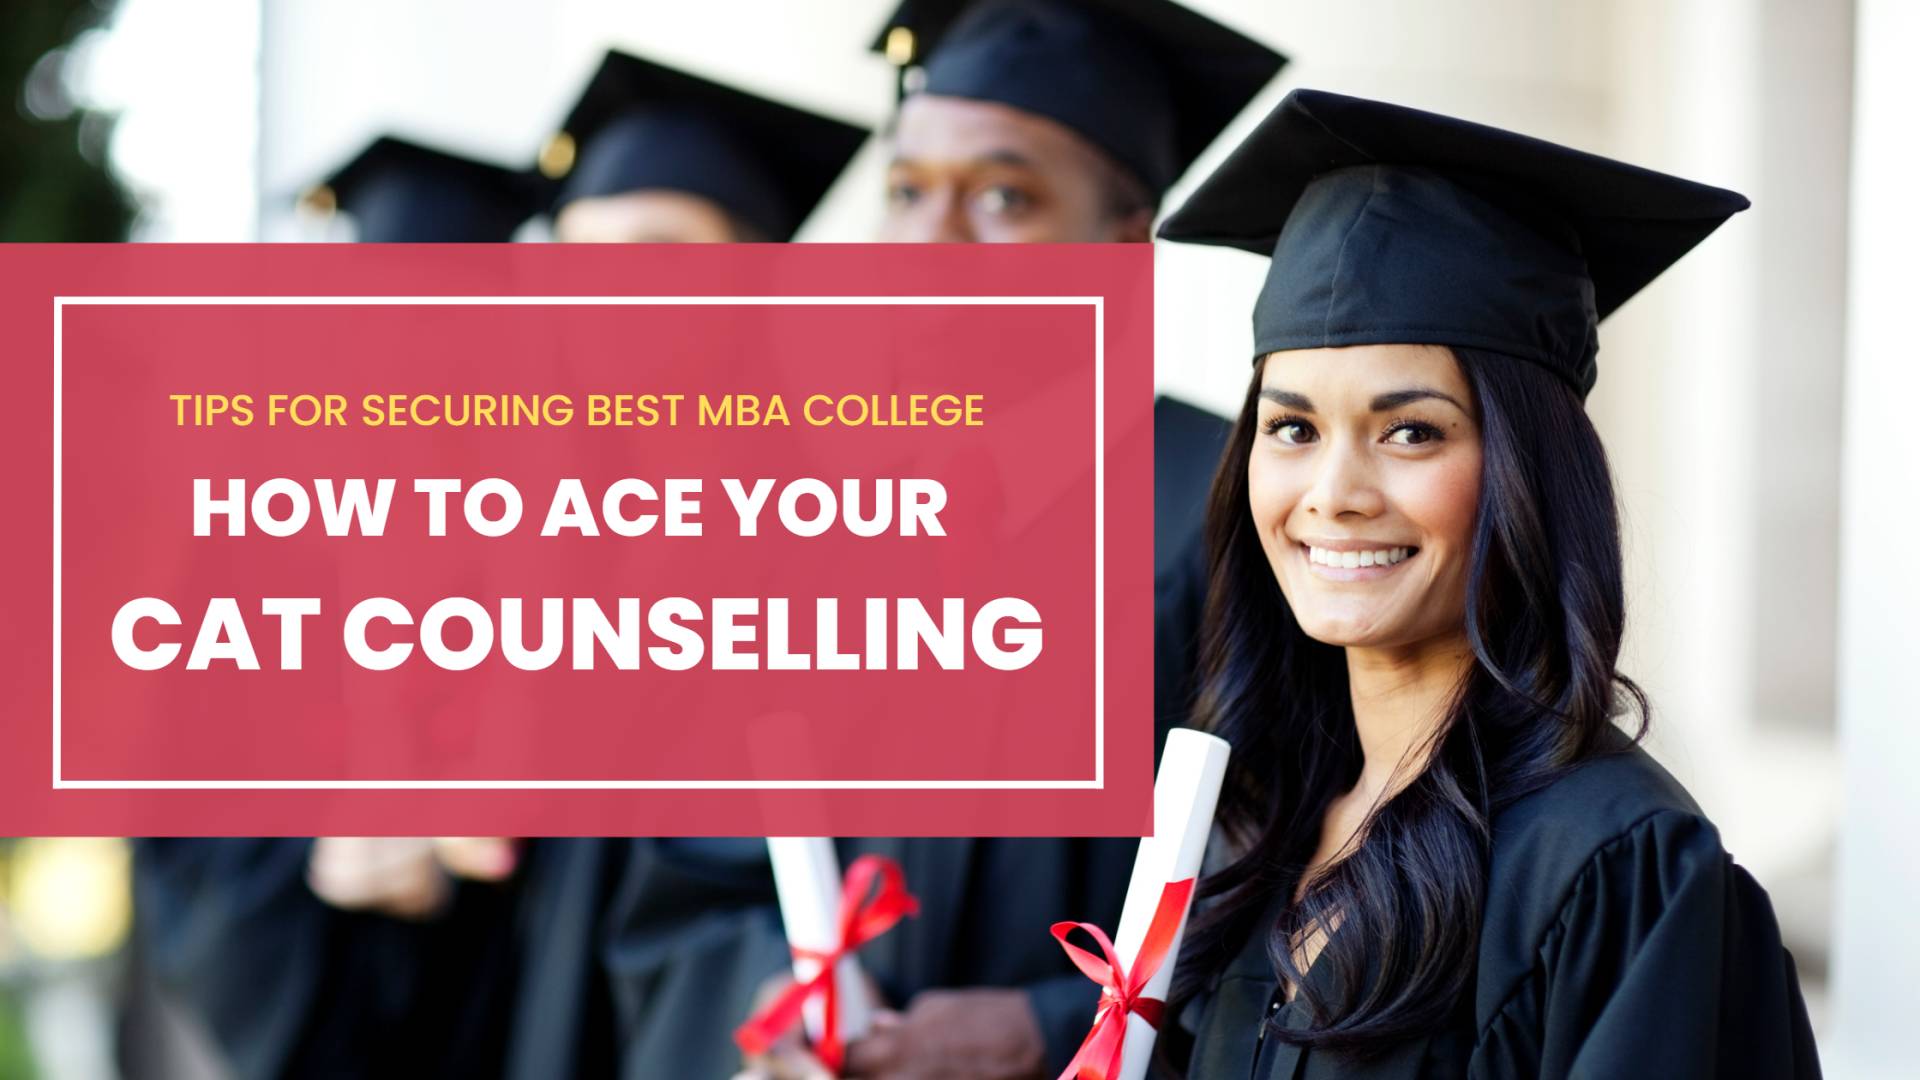 How to ace your CAT counselling Tips for securing best MBA college